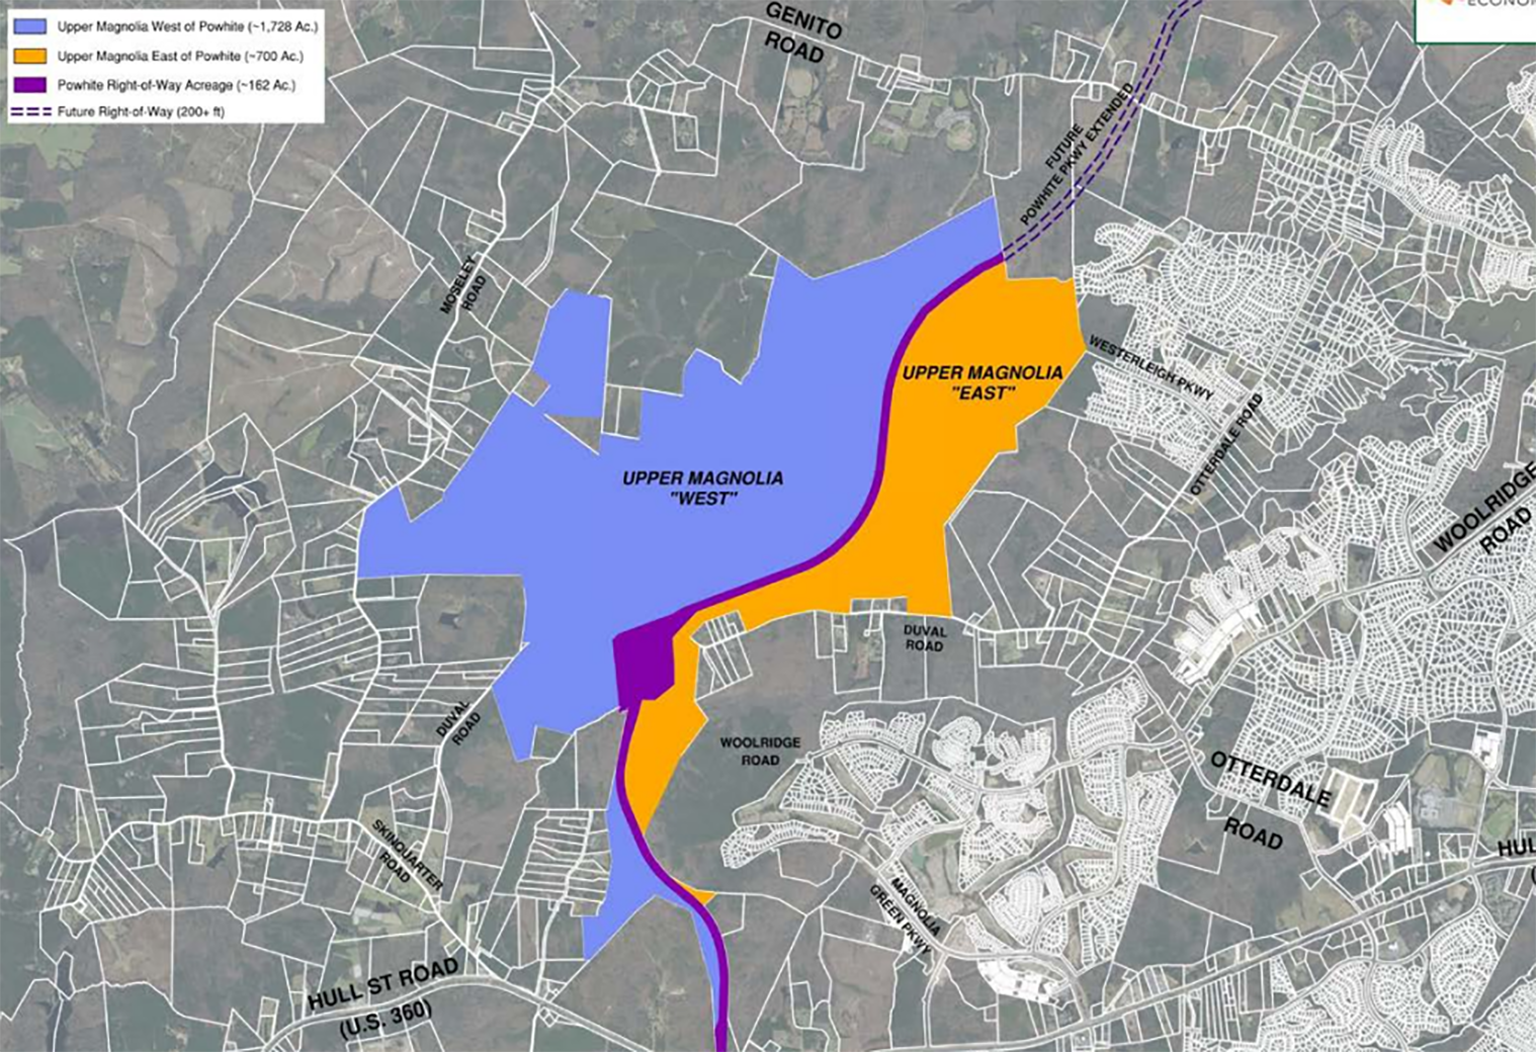 Chesterfield County looks to rezone land for tech park and homes